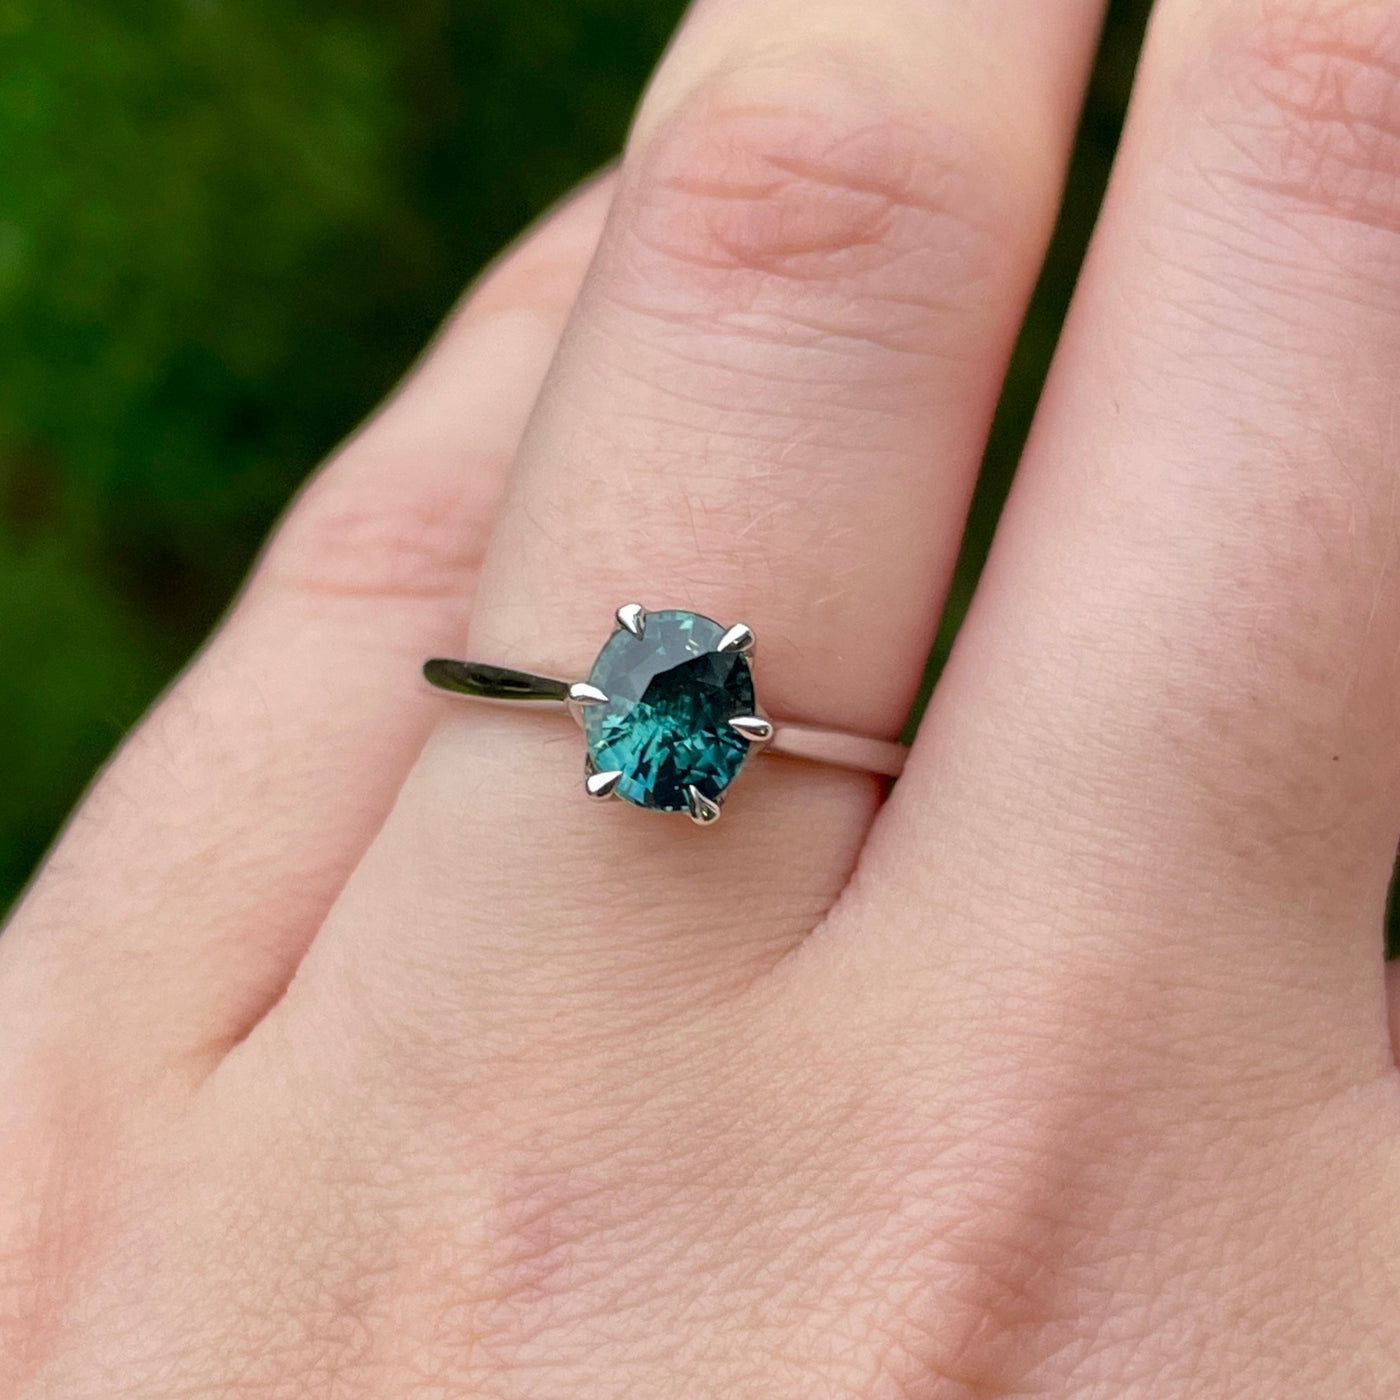 Raine - Oval Cut Teal Sapphire Solitaire Ring with Lotus Flower Inspired Setting - Made-To-Order